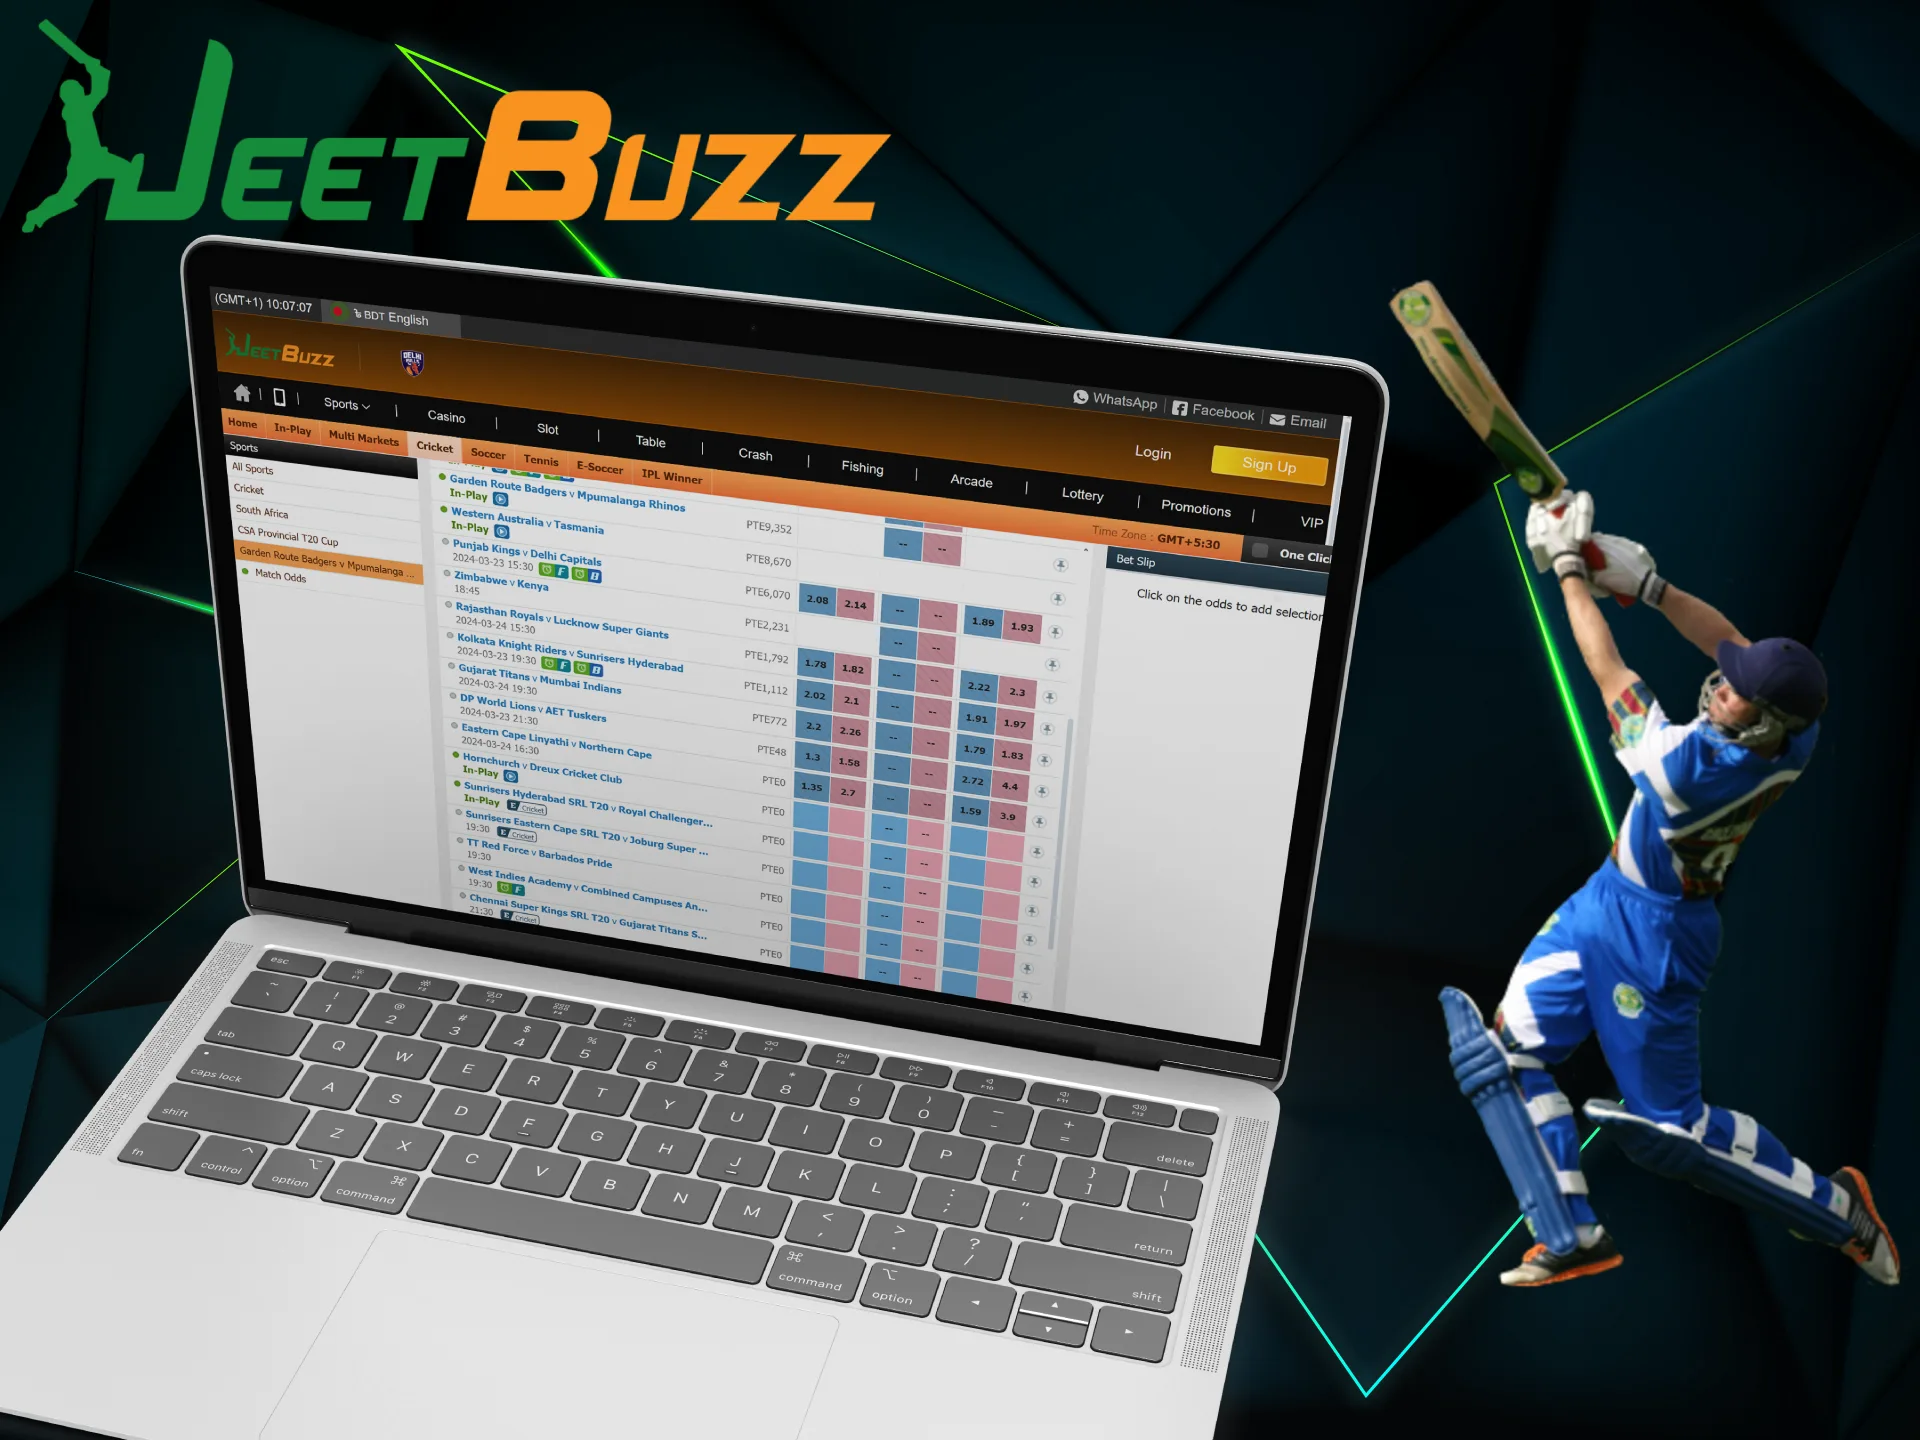 Use cricket betting tips and strategies to increase your chance of winning at JeetBuzz.